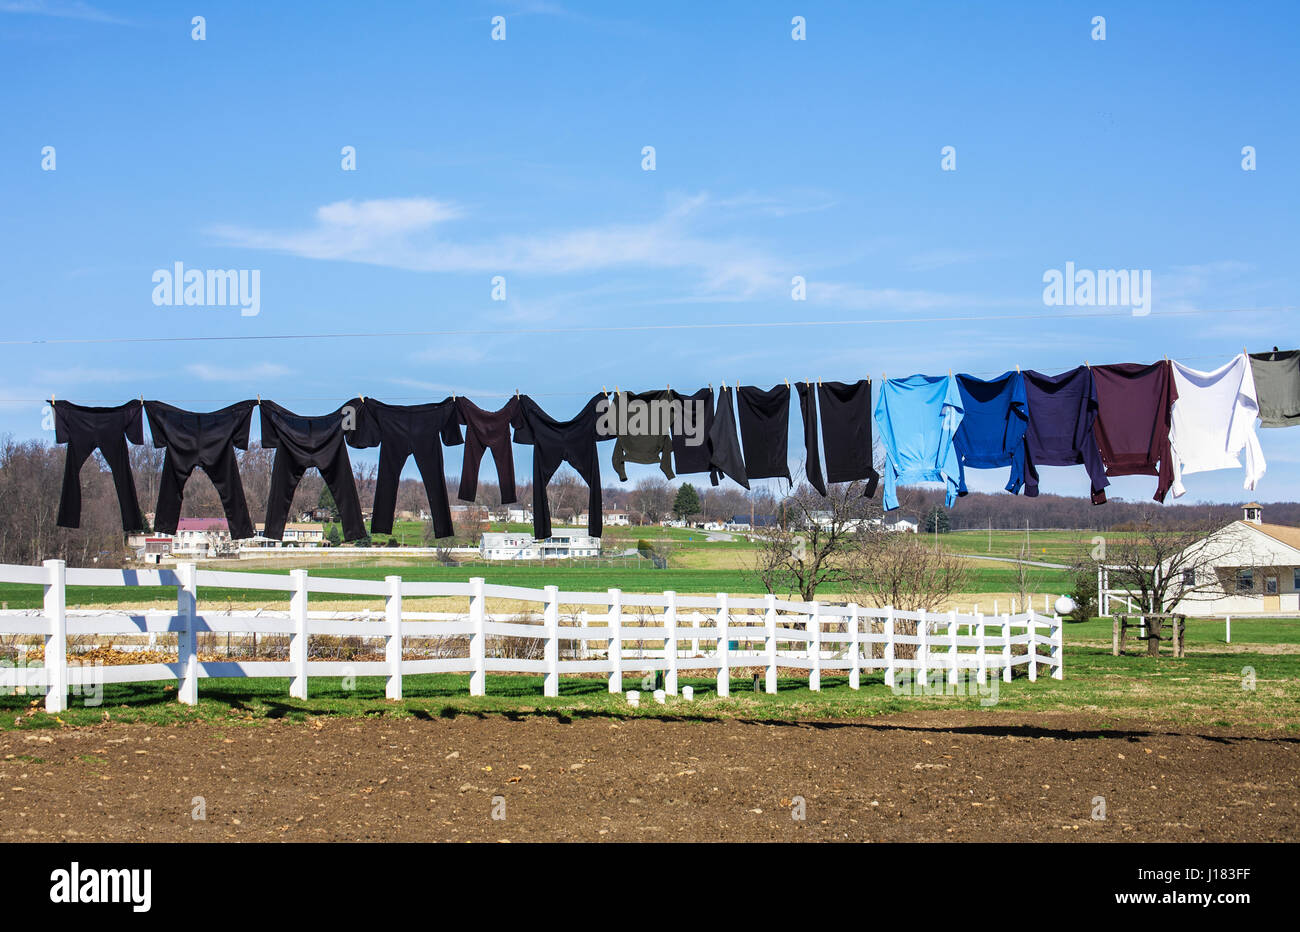 Amish clothing hanging on a clothesline against blue sky, Lancaster County, rural Pennsylvania, Pa images USA, America, Amish farmland Stock Photo